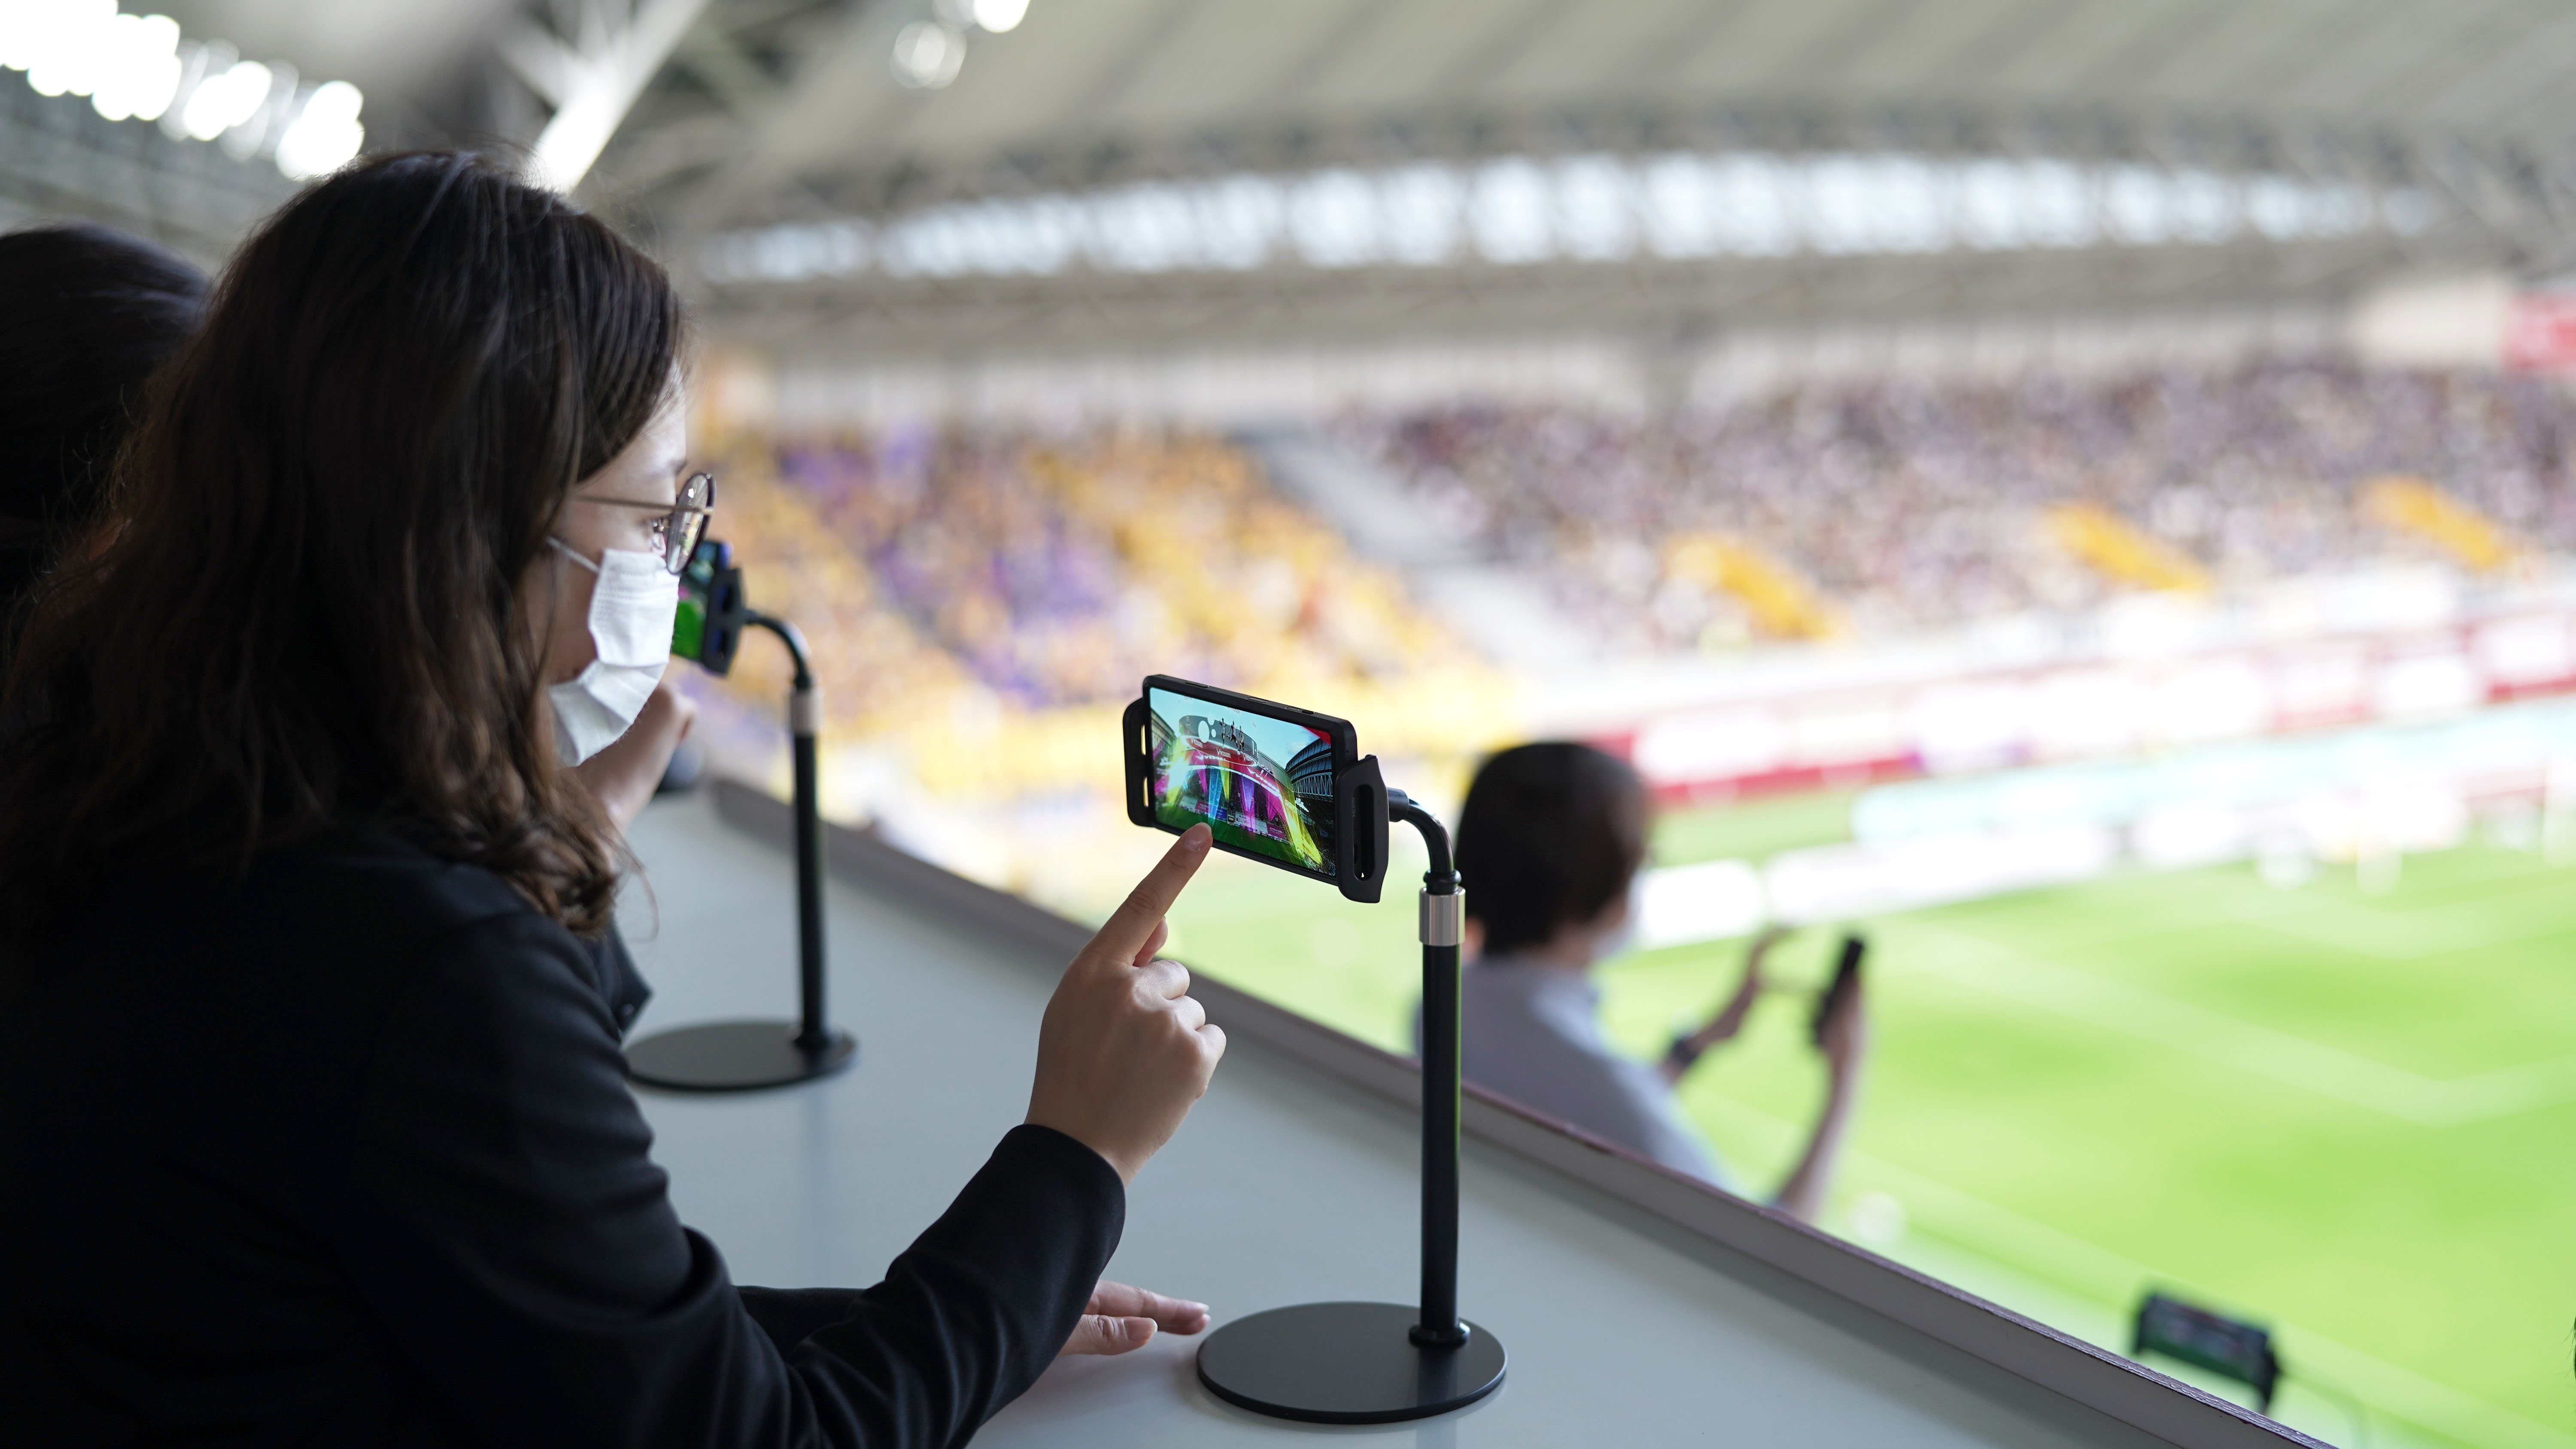 01_PoC_1 Rakuten Stadium AR experience with 5G and Immersal visual positioning system